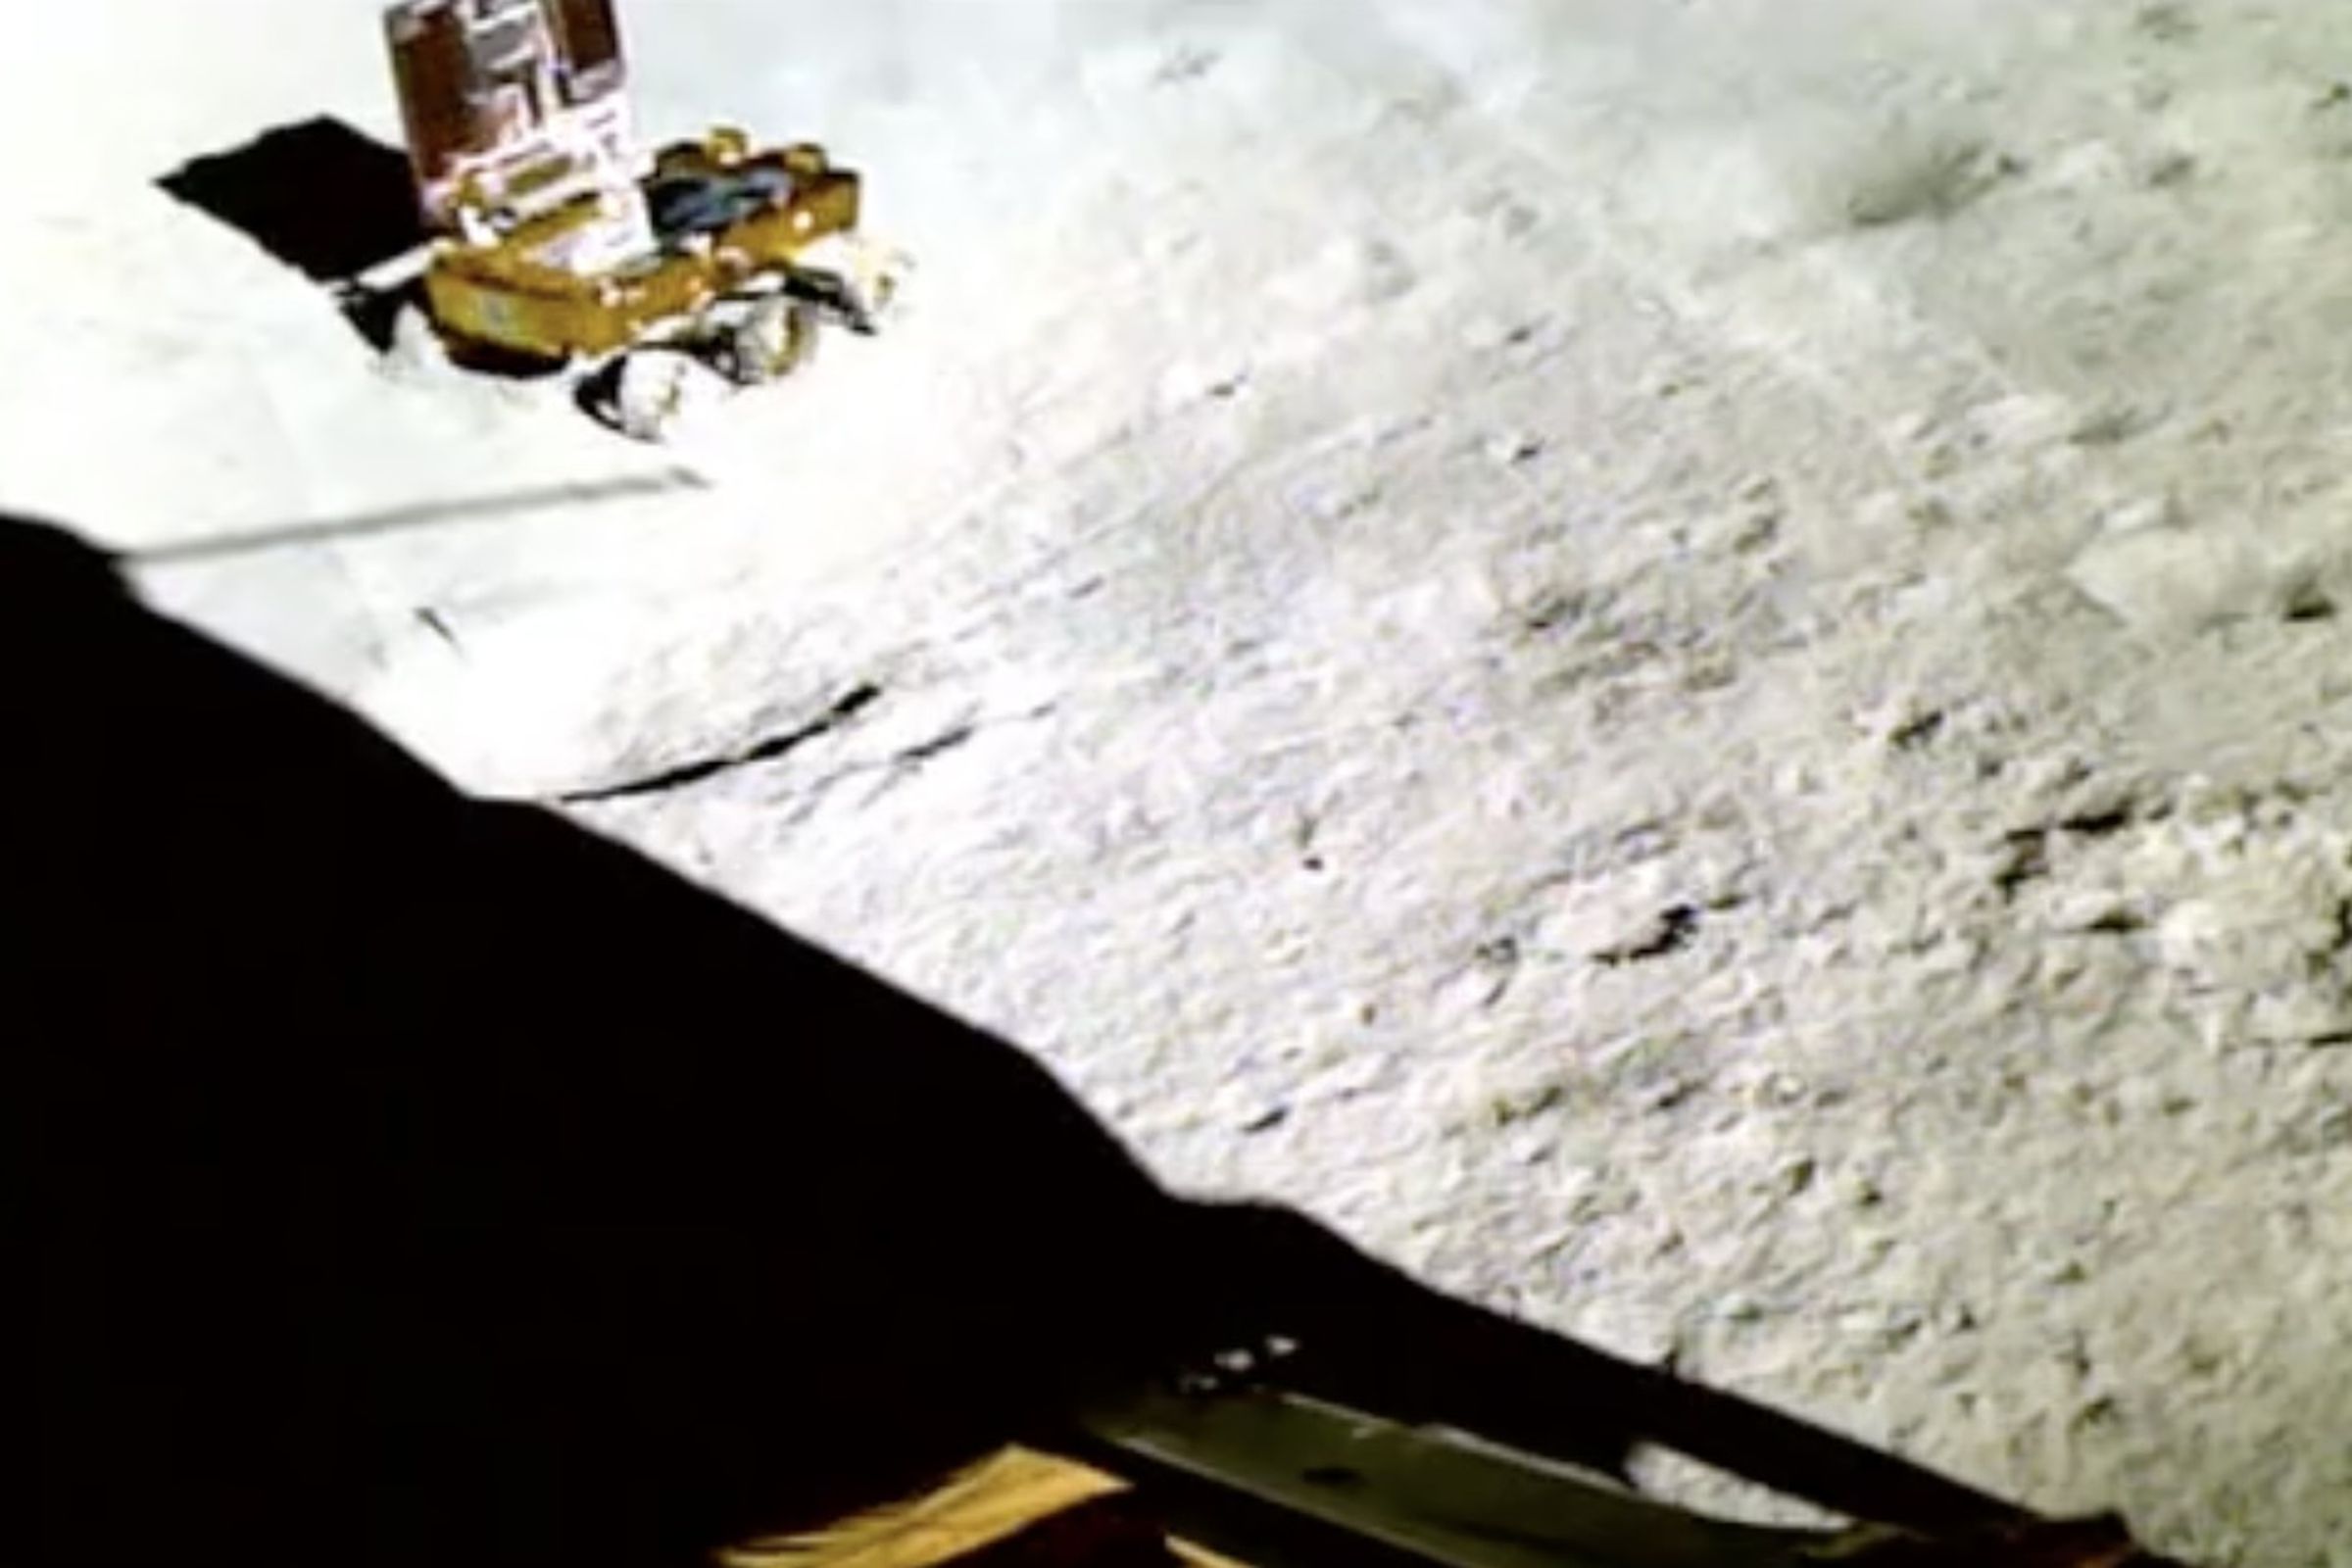 Screen capture of rover on surface of moon